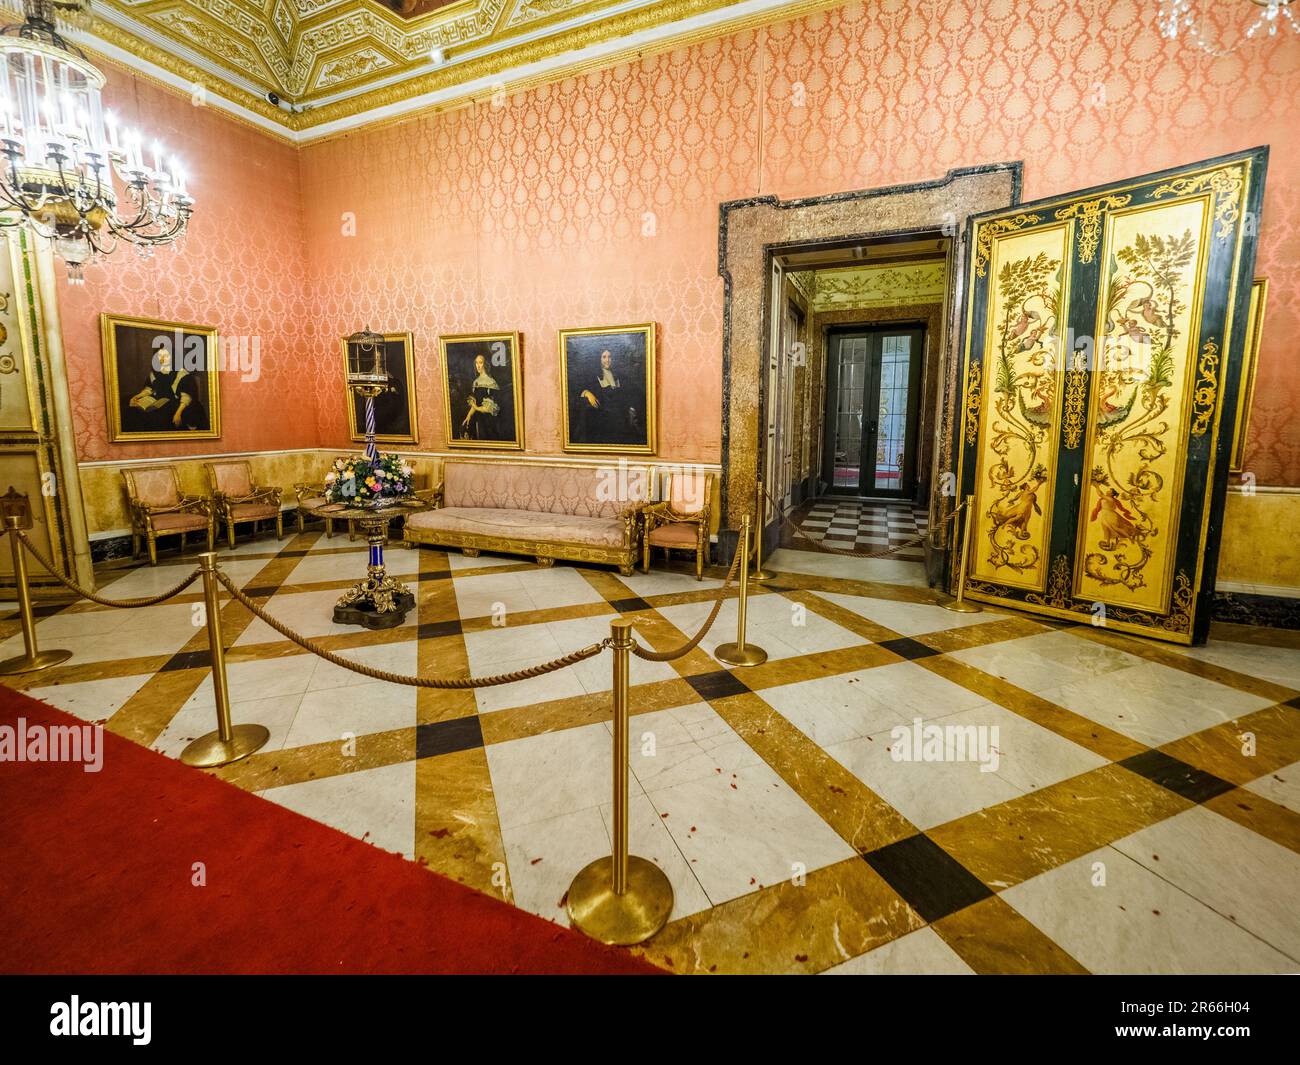 Flemish Hall with a collection of Dutch portraits of the 17th century in the Royal Palace of Naples that In 1734 became the royal residence of the Bourbons - Naples, Italy Stock Photo